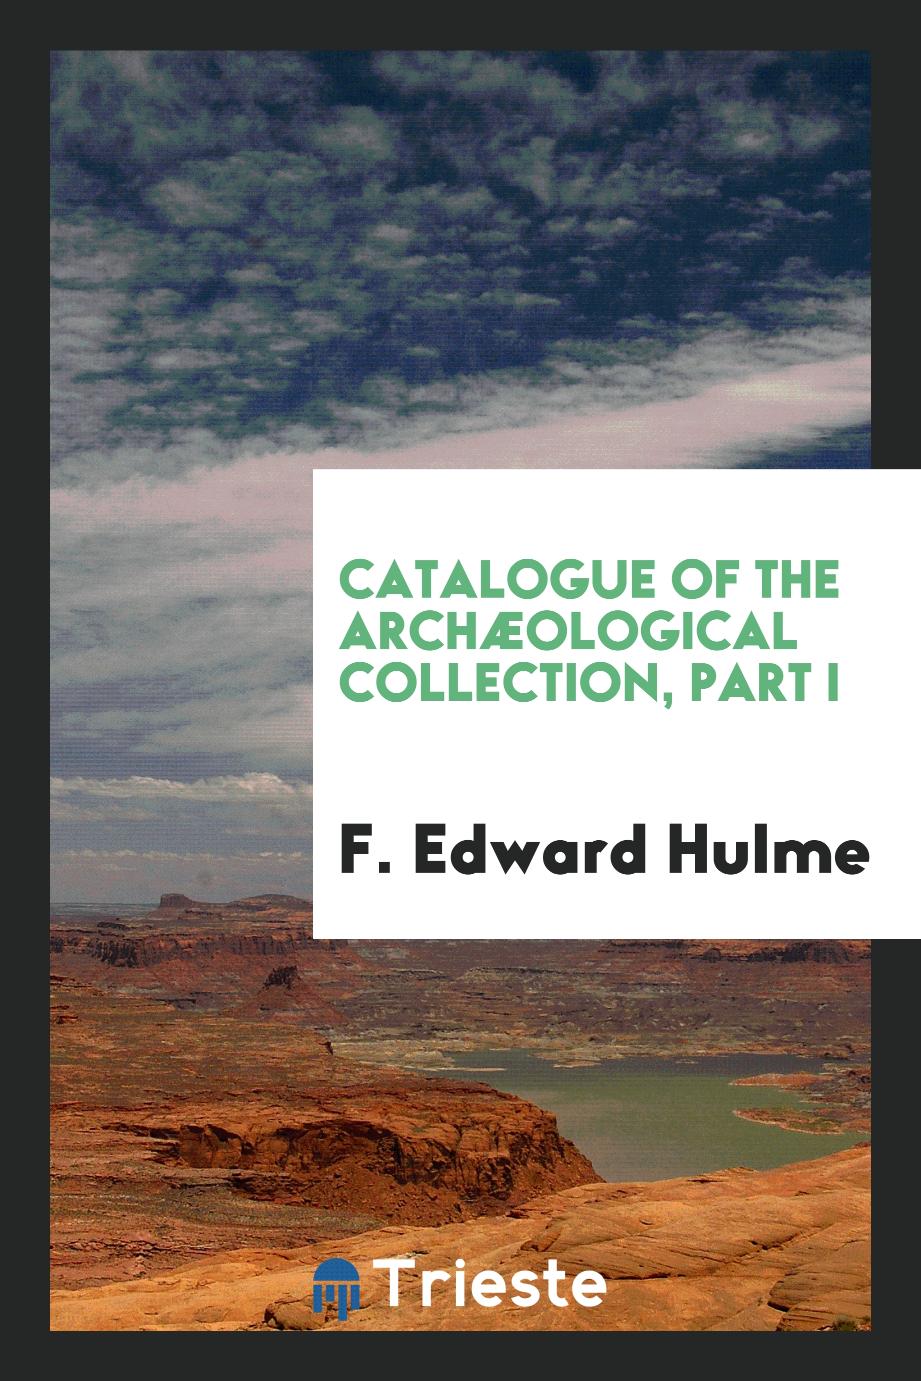 Catalogue of the archæological collection, Part I